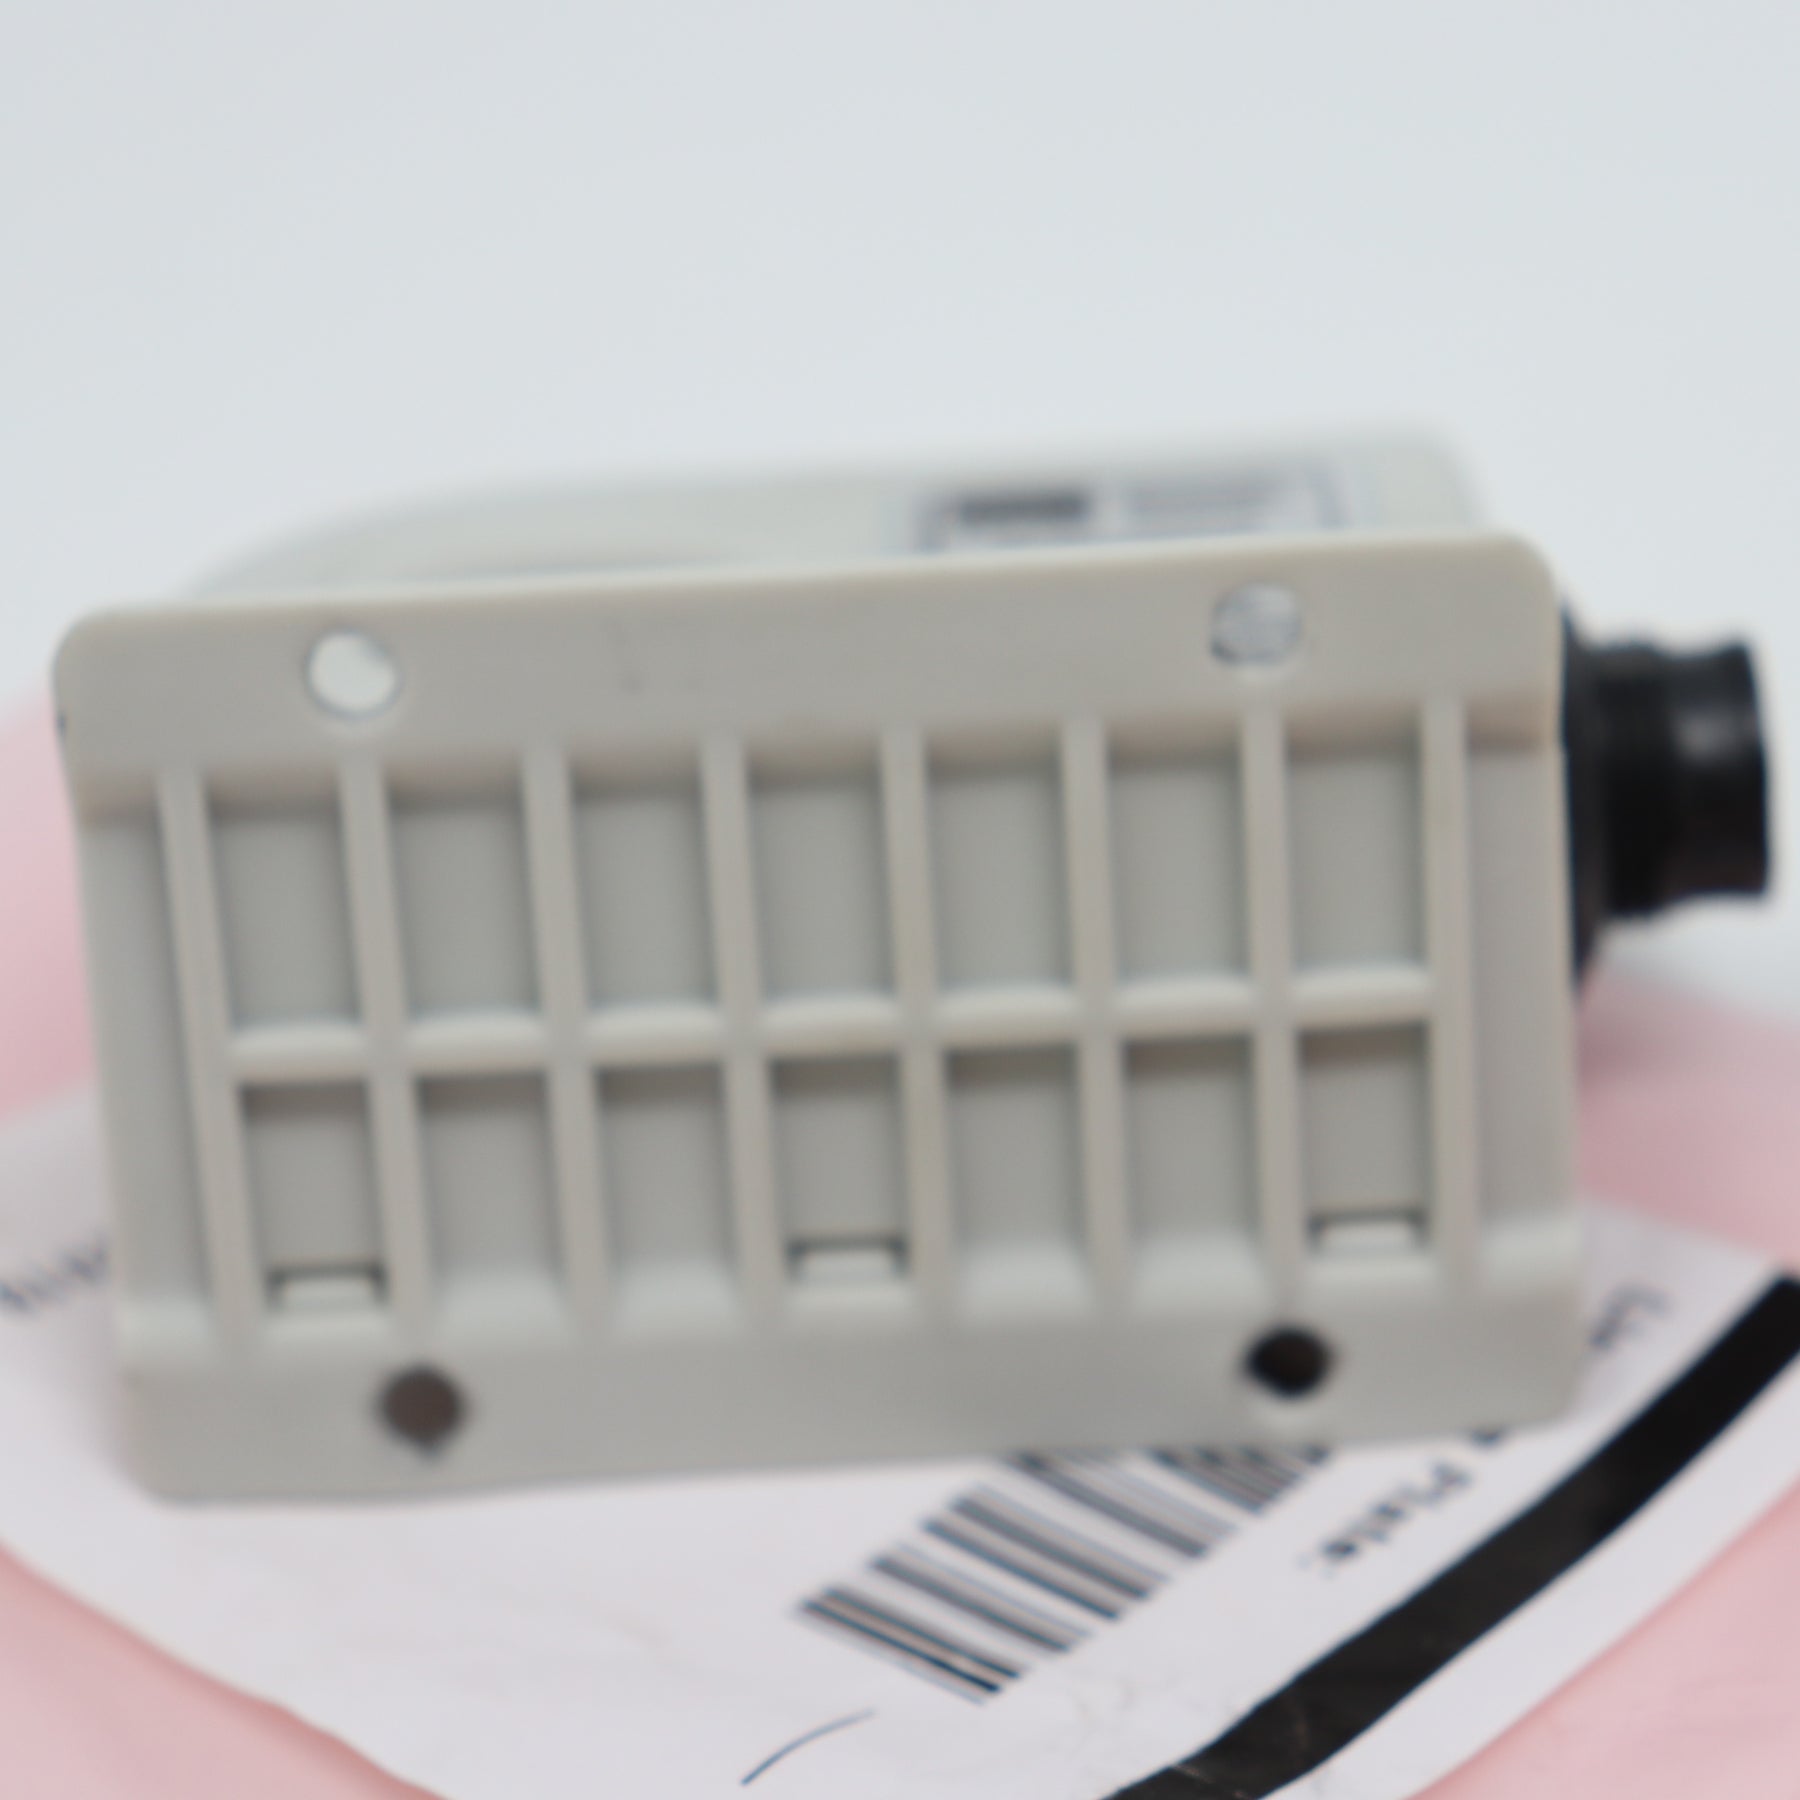 AAC 50A Bi-Directional DC Current Transducer w/ Connector 929-50-C